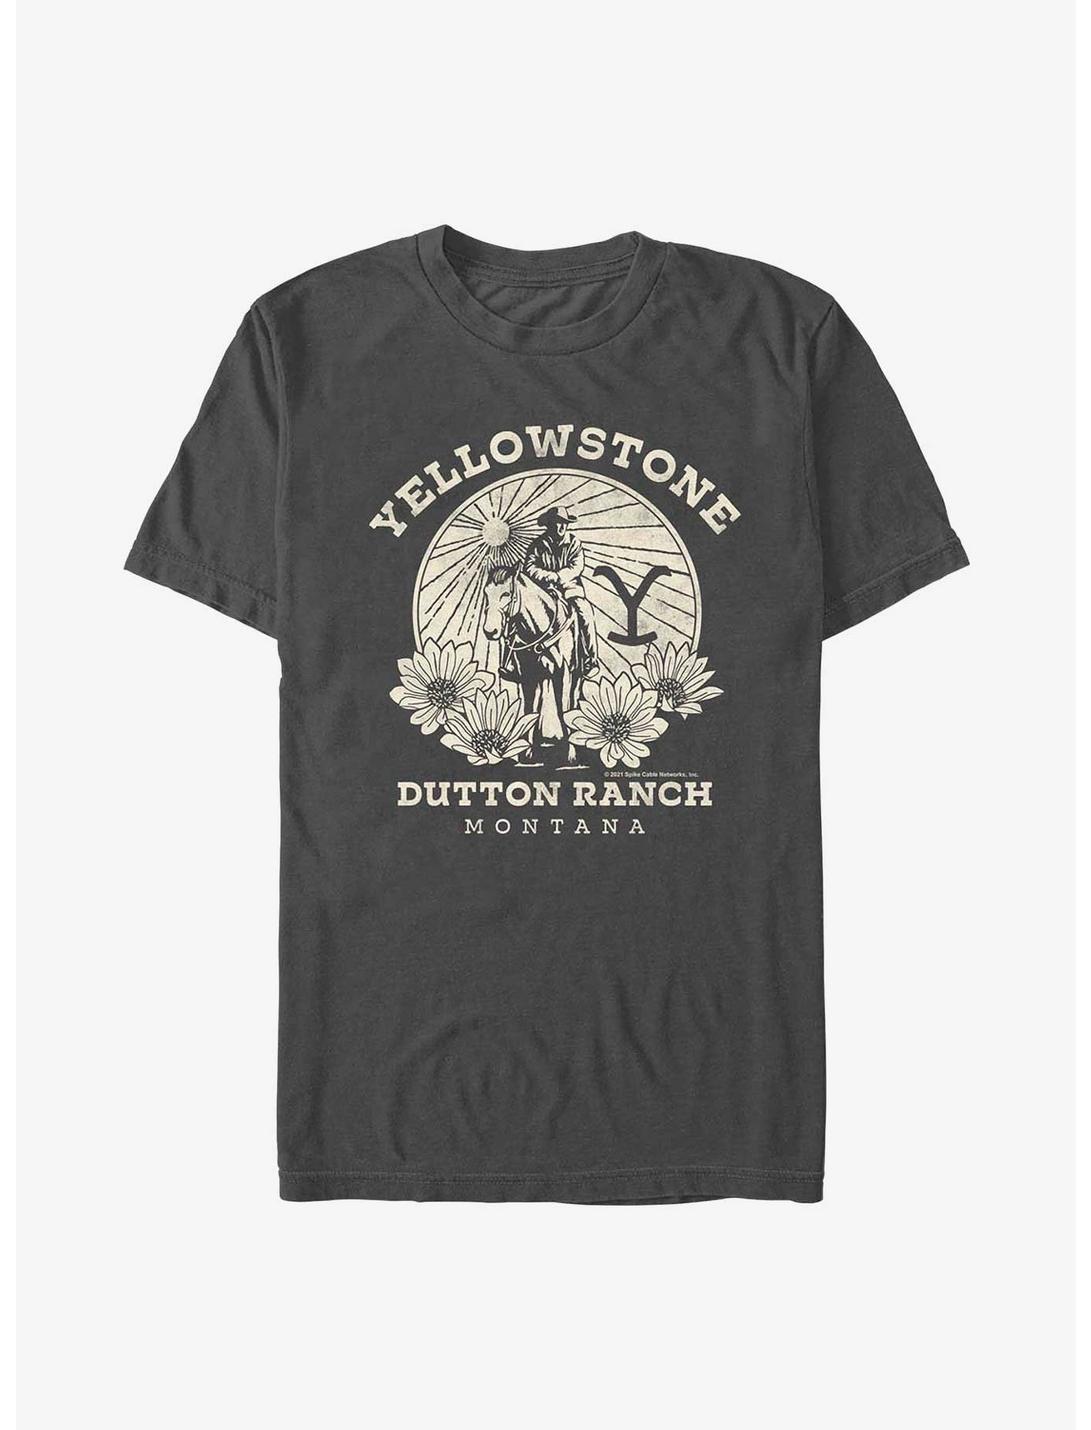 Yellowstone Dutton Ranch Floral T-Shirt, CHARCOAL, hi-res